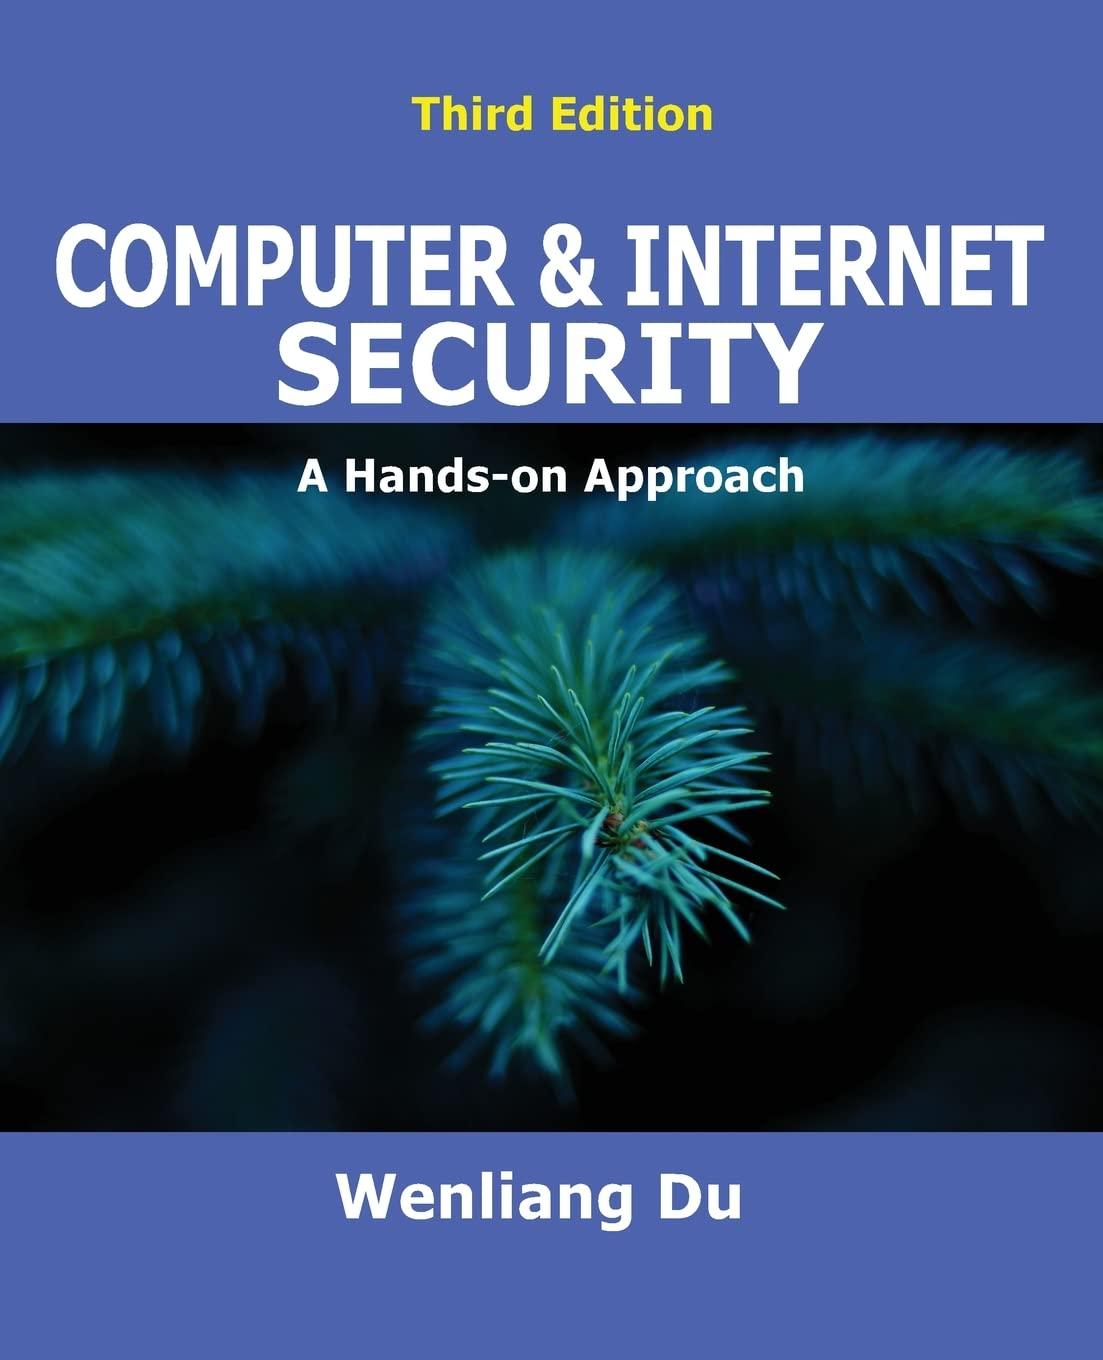 computer  internet security  a hands on approach 3rd edition wenliang du 1733003940, 978-1733003940